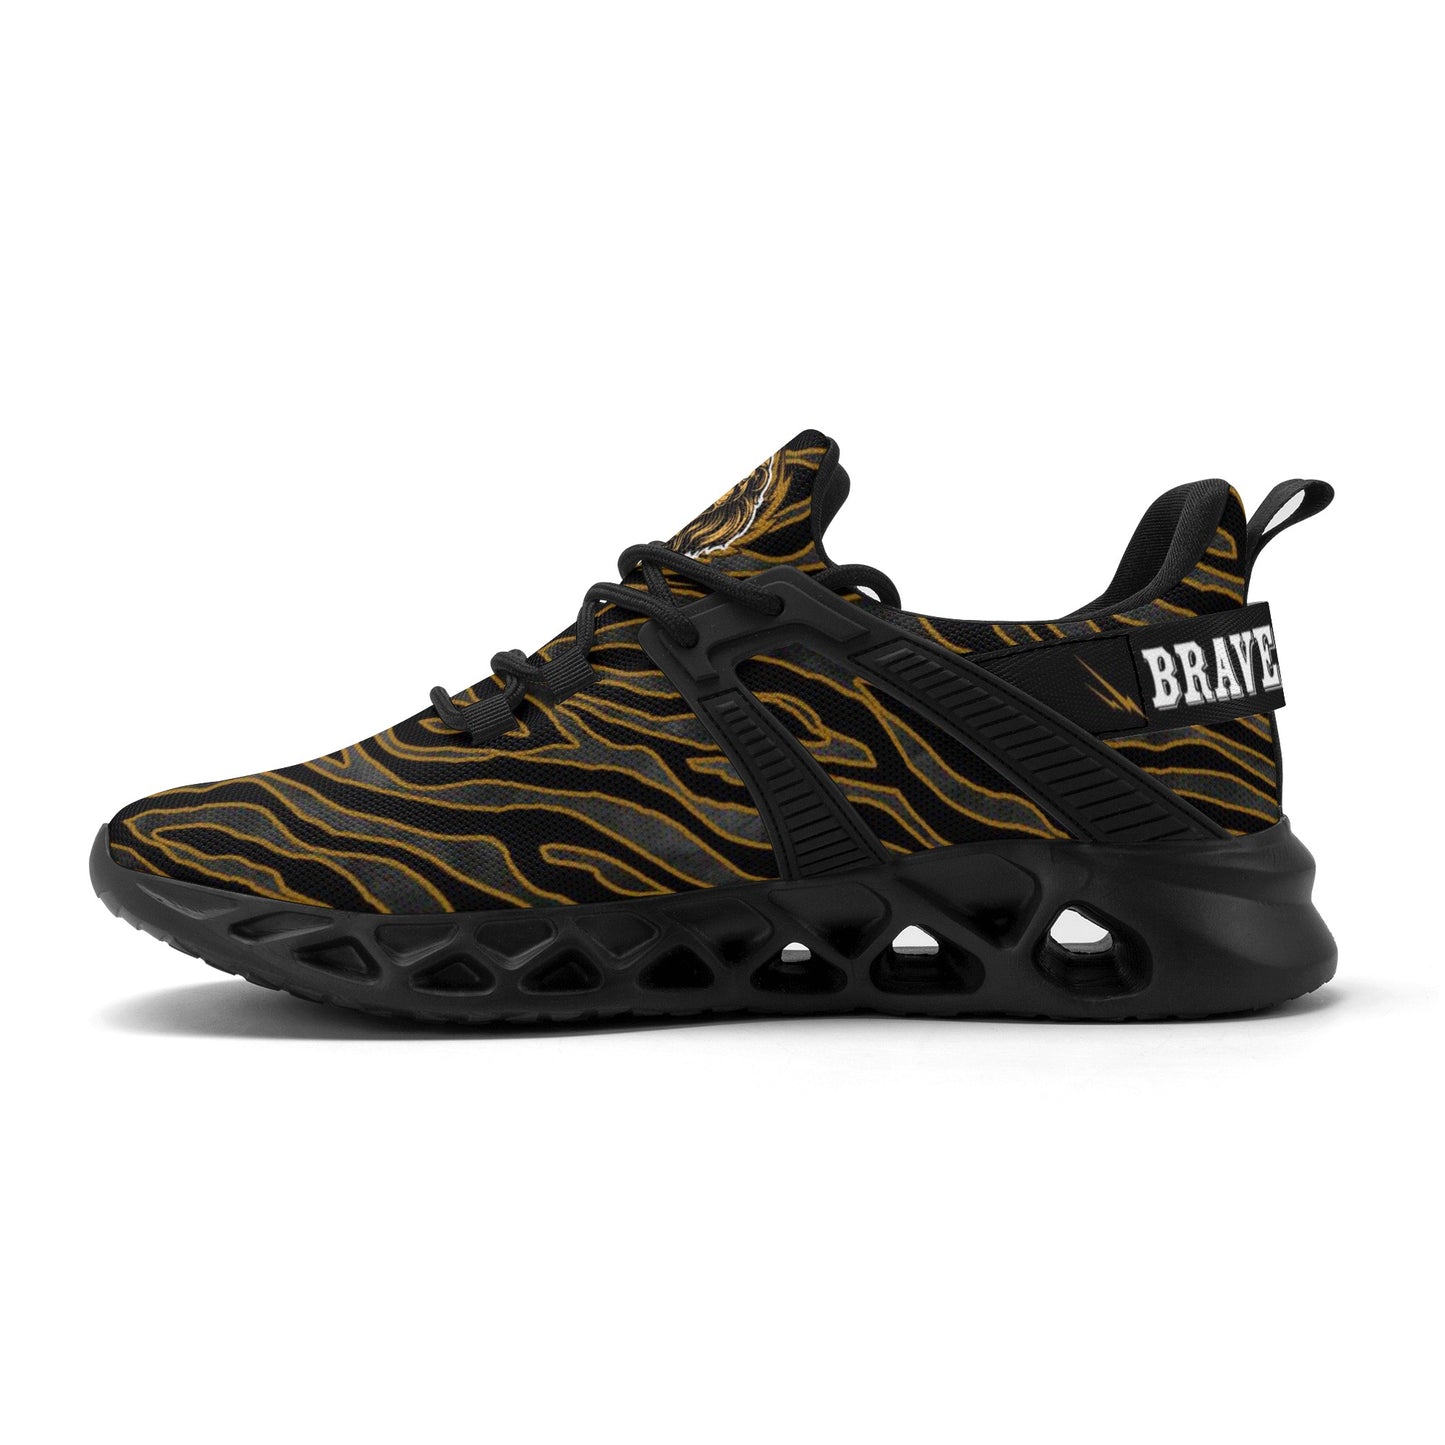 Wise and Brave Motivational Lions Head Sneaker For Men